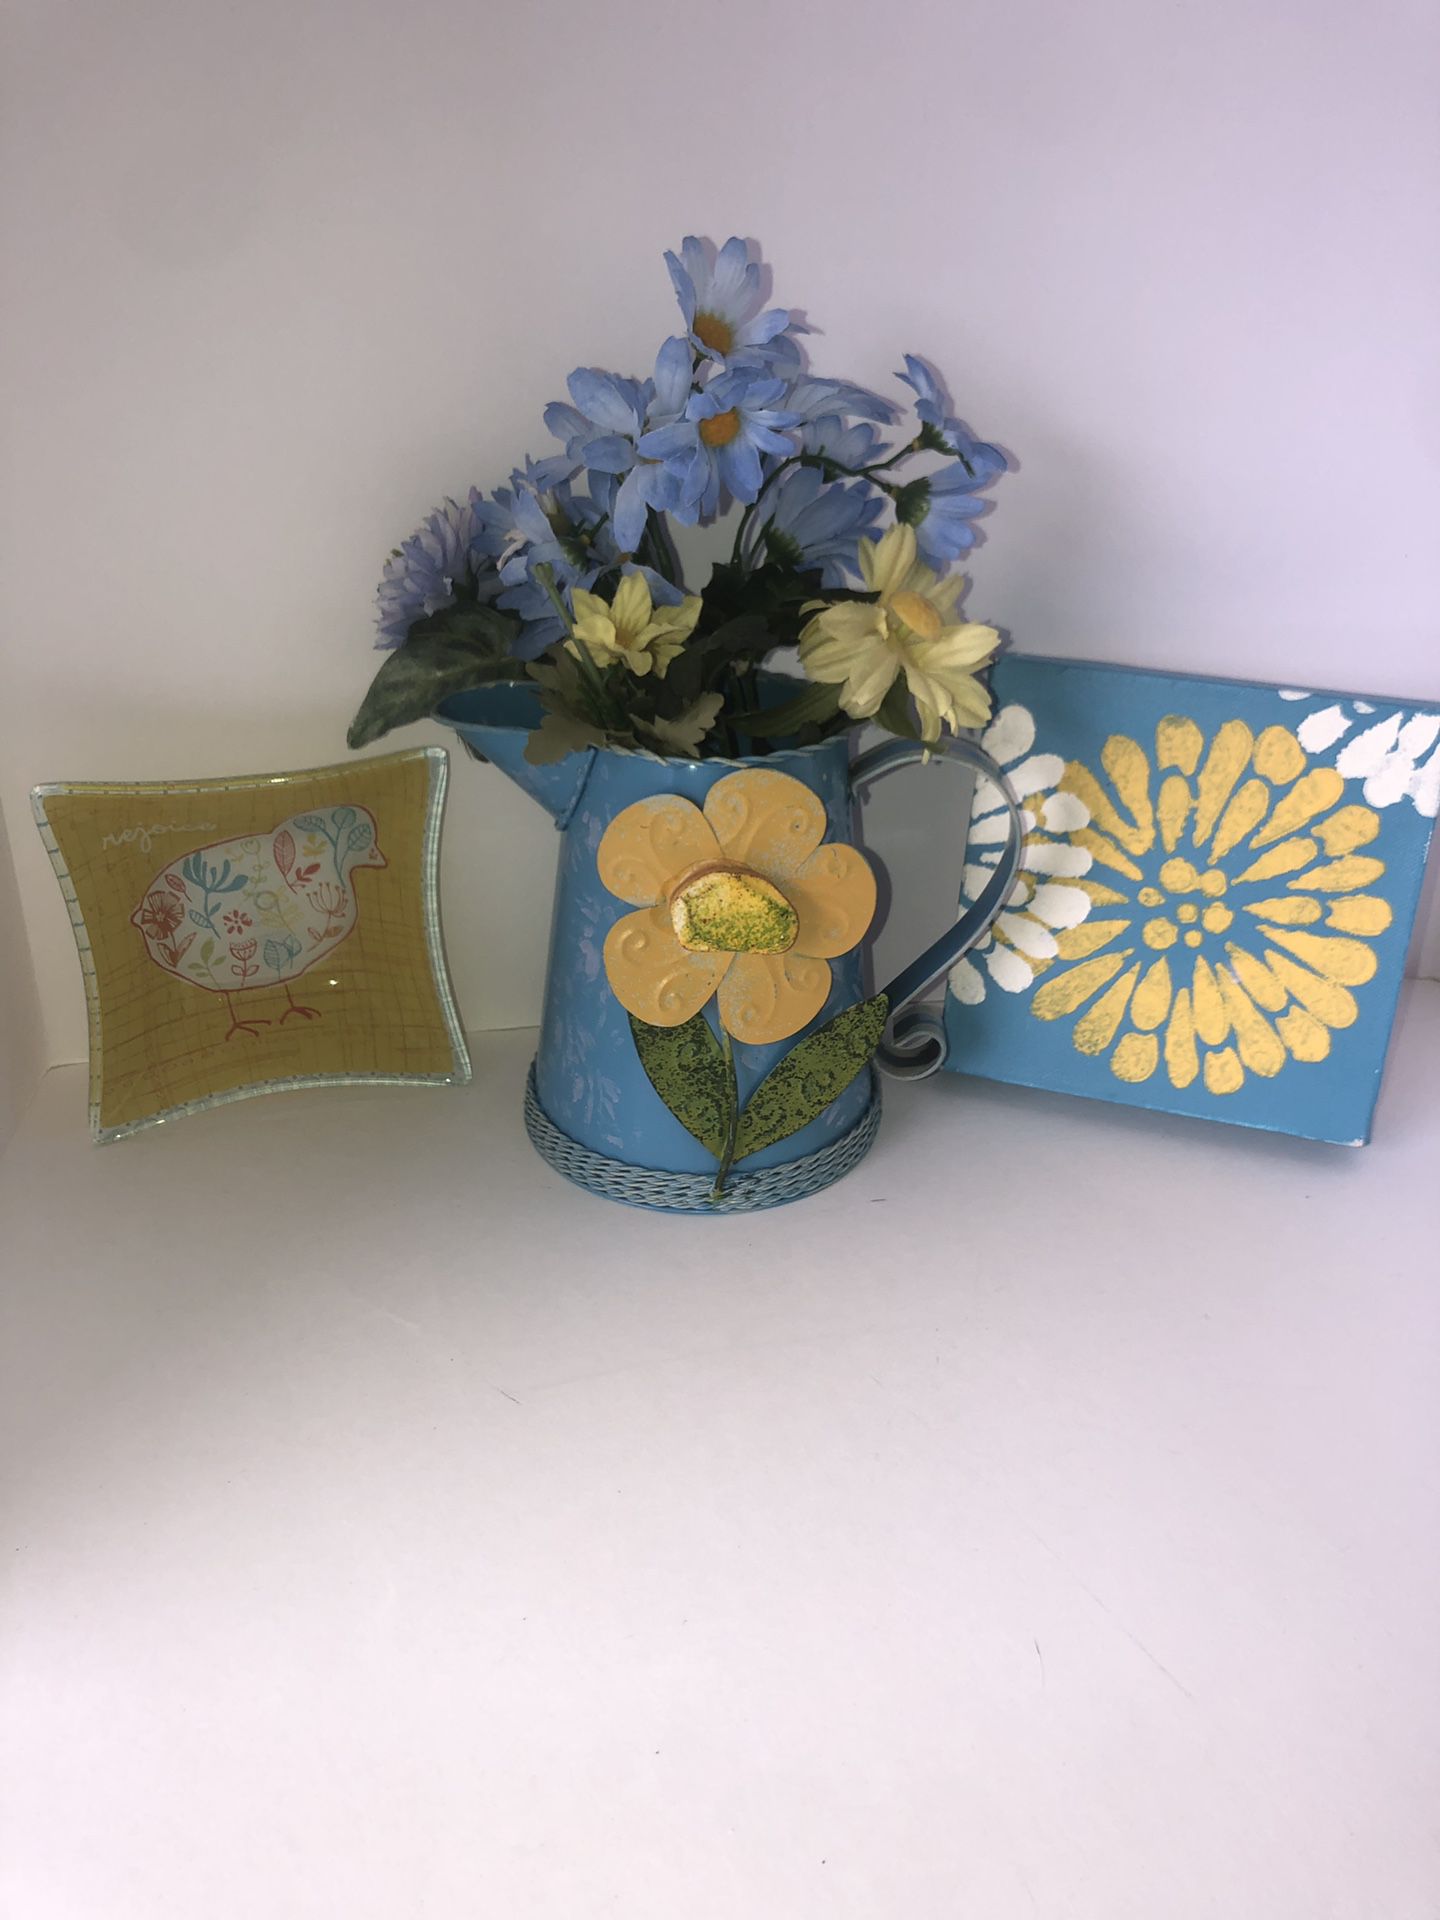 Cheerful yellow & blue flowers canvas wall decoration (6”x6”), glass REJOICE trinket dish (5”x5”x2”), & tin watering can w/3D flower & floral bouquet